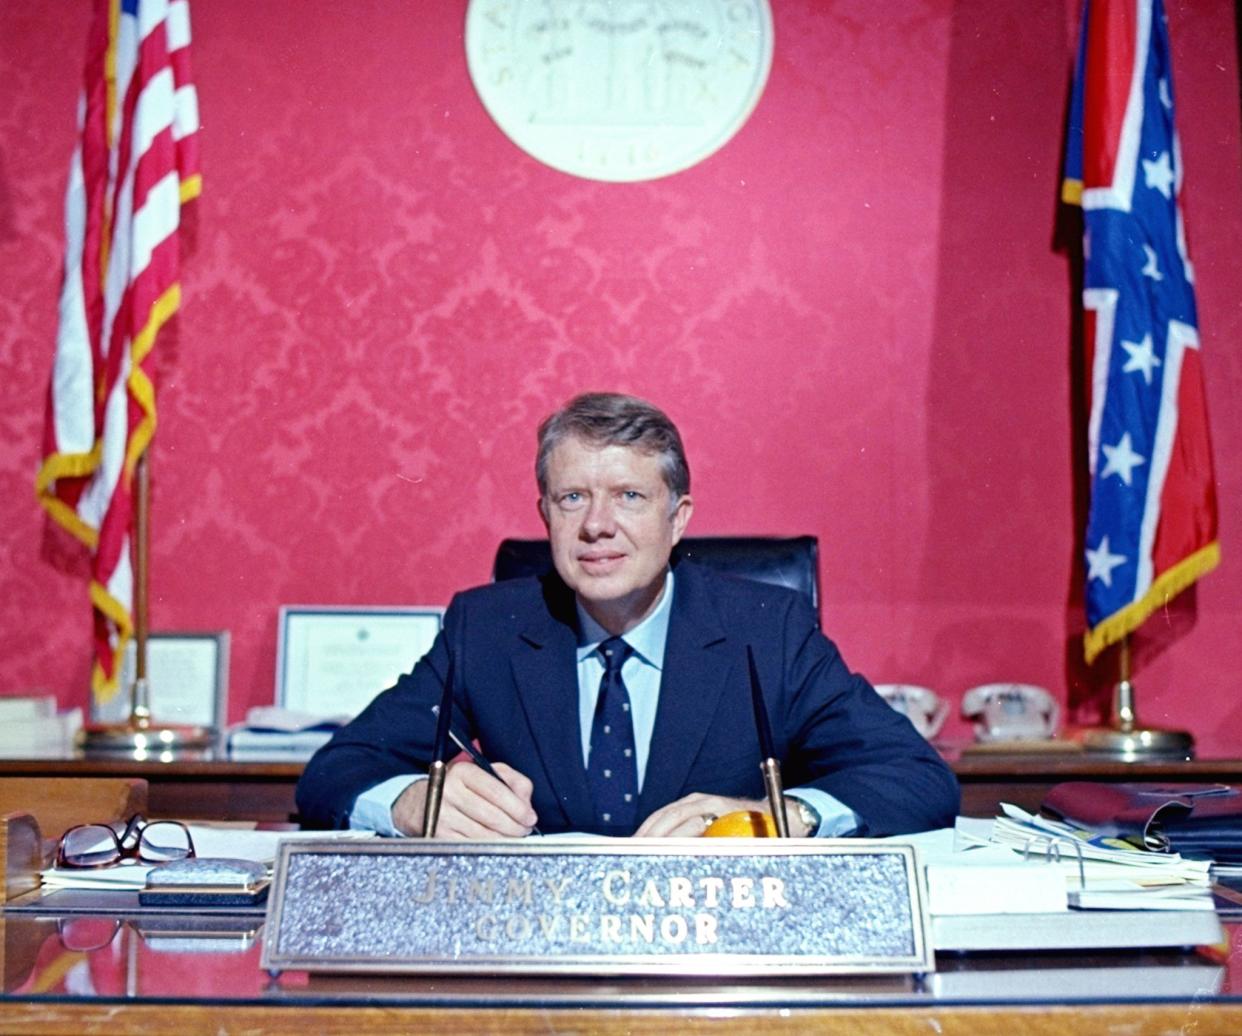 Gov. Jimmy Carter is at his desk at the Georgia State Capitol on Feb. 19, 1971, in Atlanta. His term began on Jan. 12, 1971.